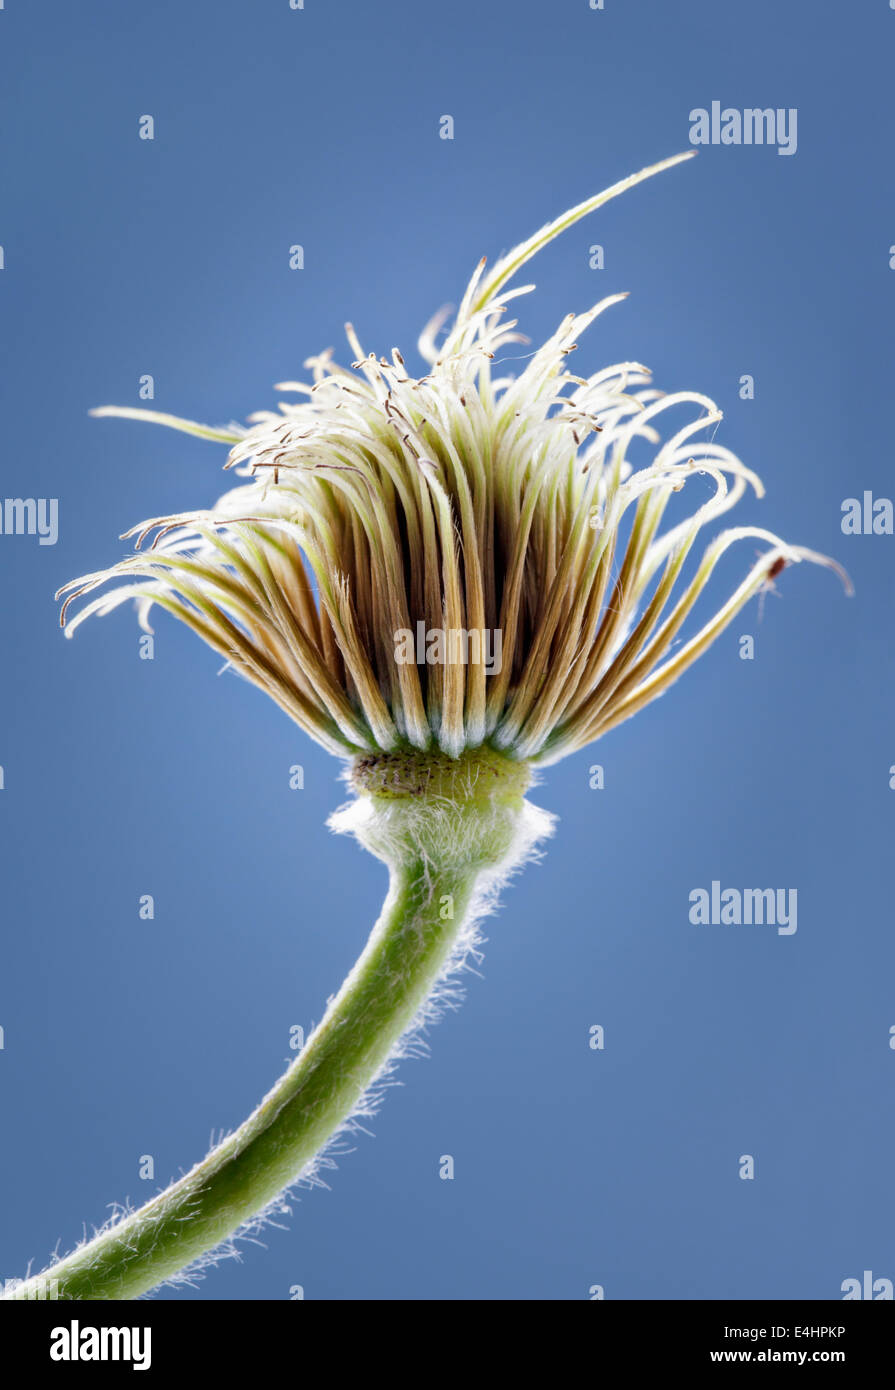 Clematis Seed Head on Sky blue Background Stock Photo